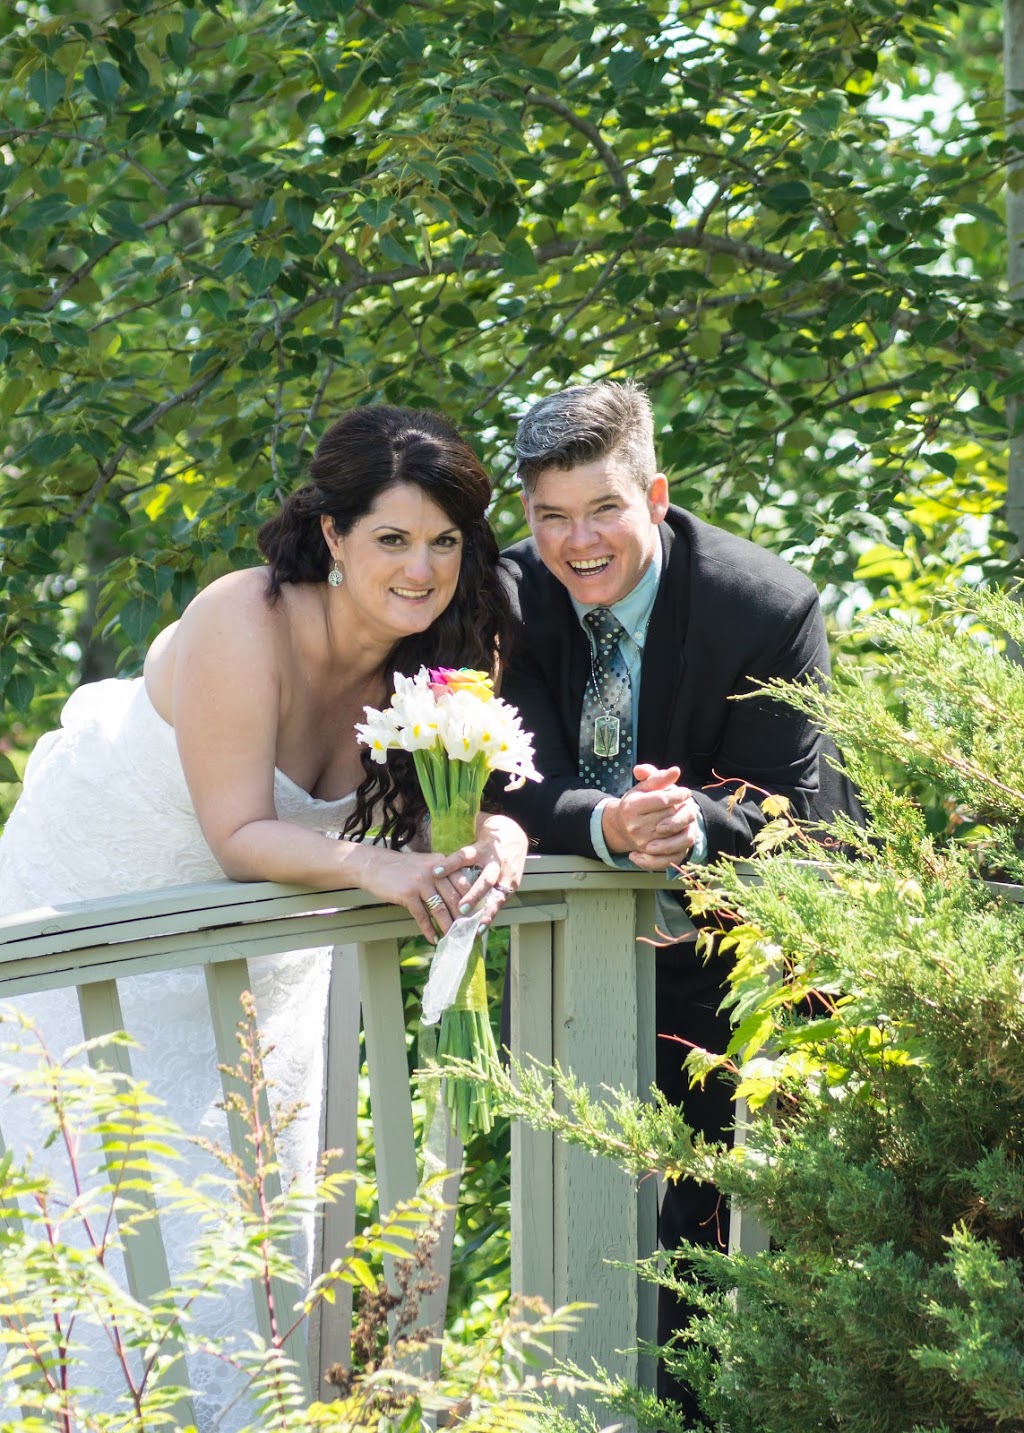 Amazing Moments Photography | 98 Wagner Crescent, Angus, ON L0M, Canada | Phone: (705) 770-7178